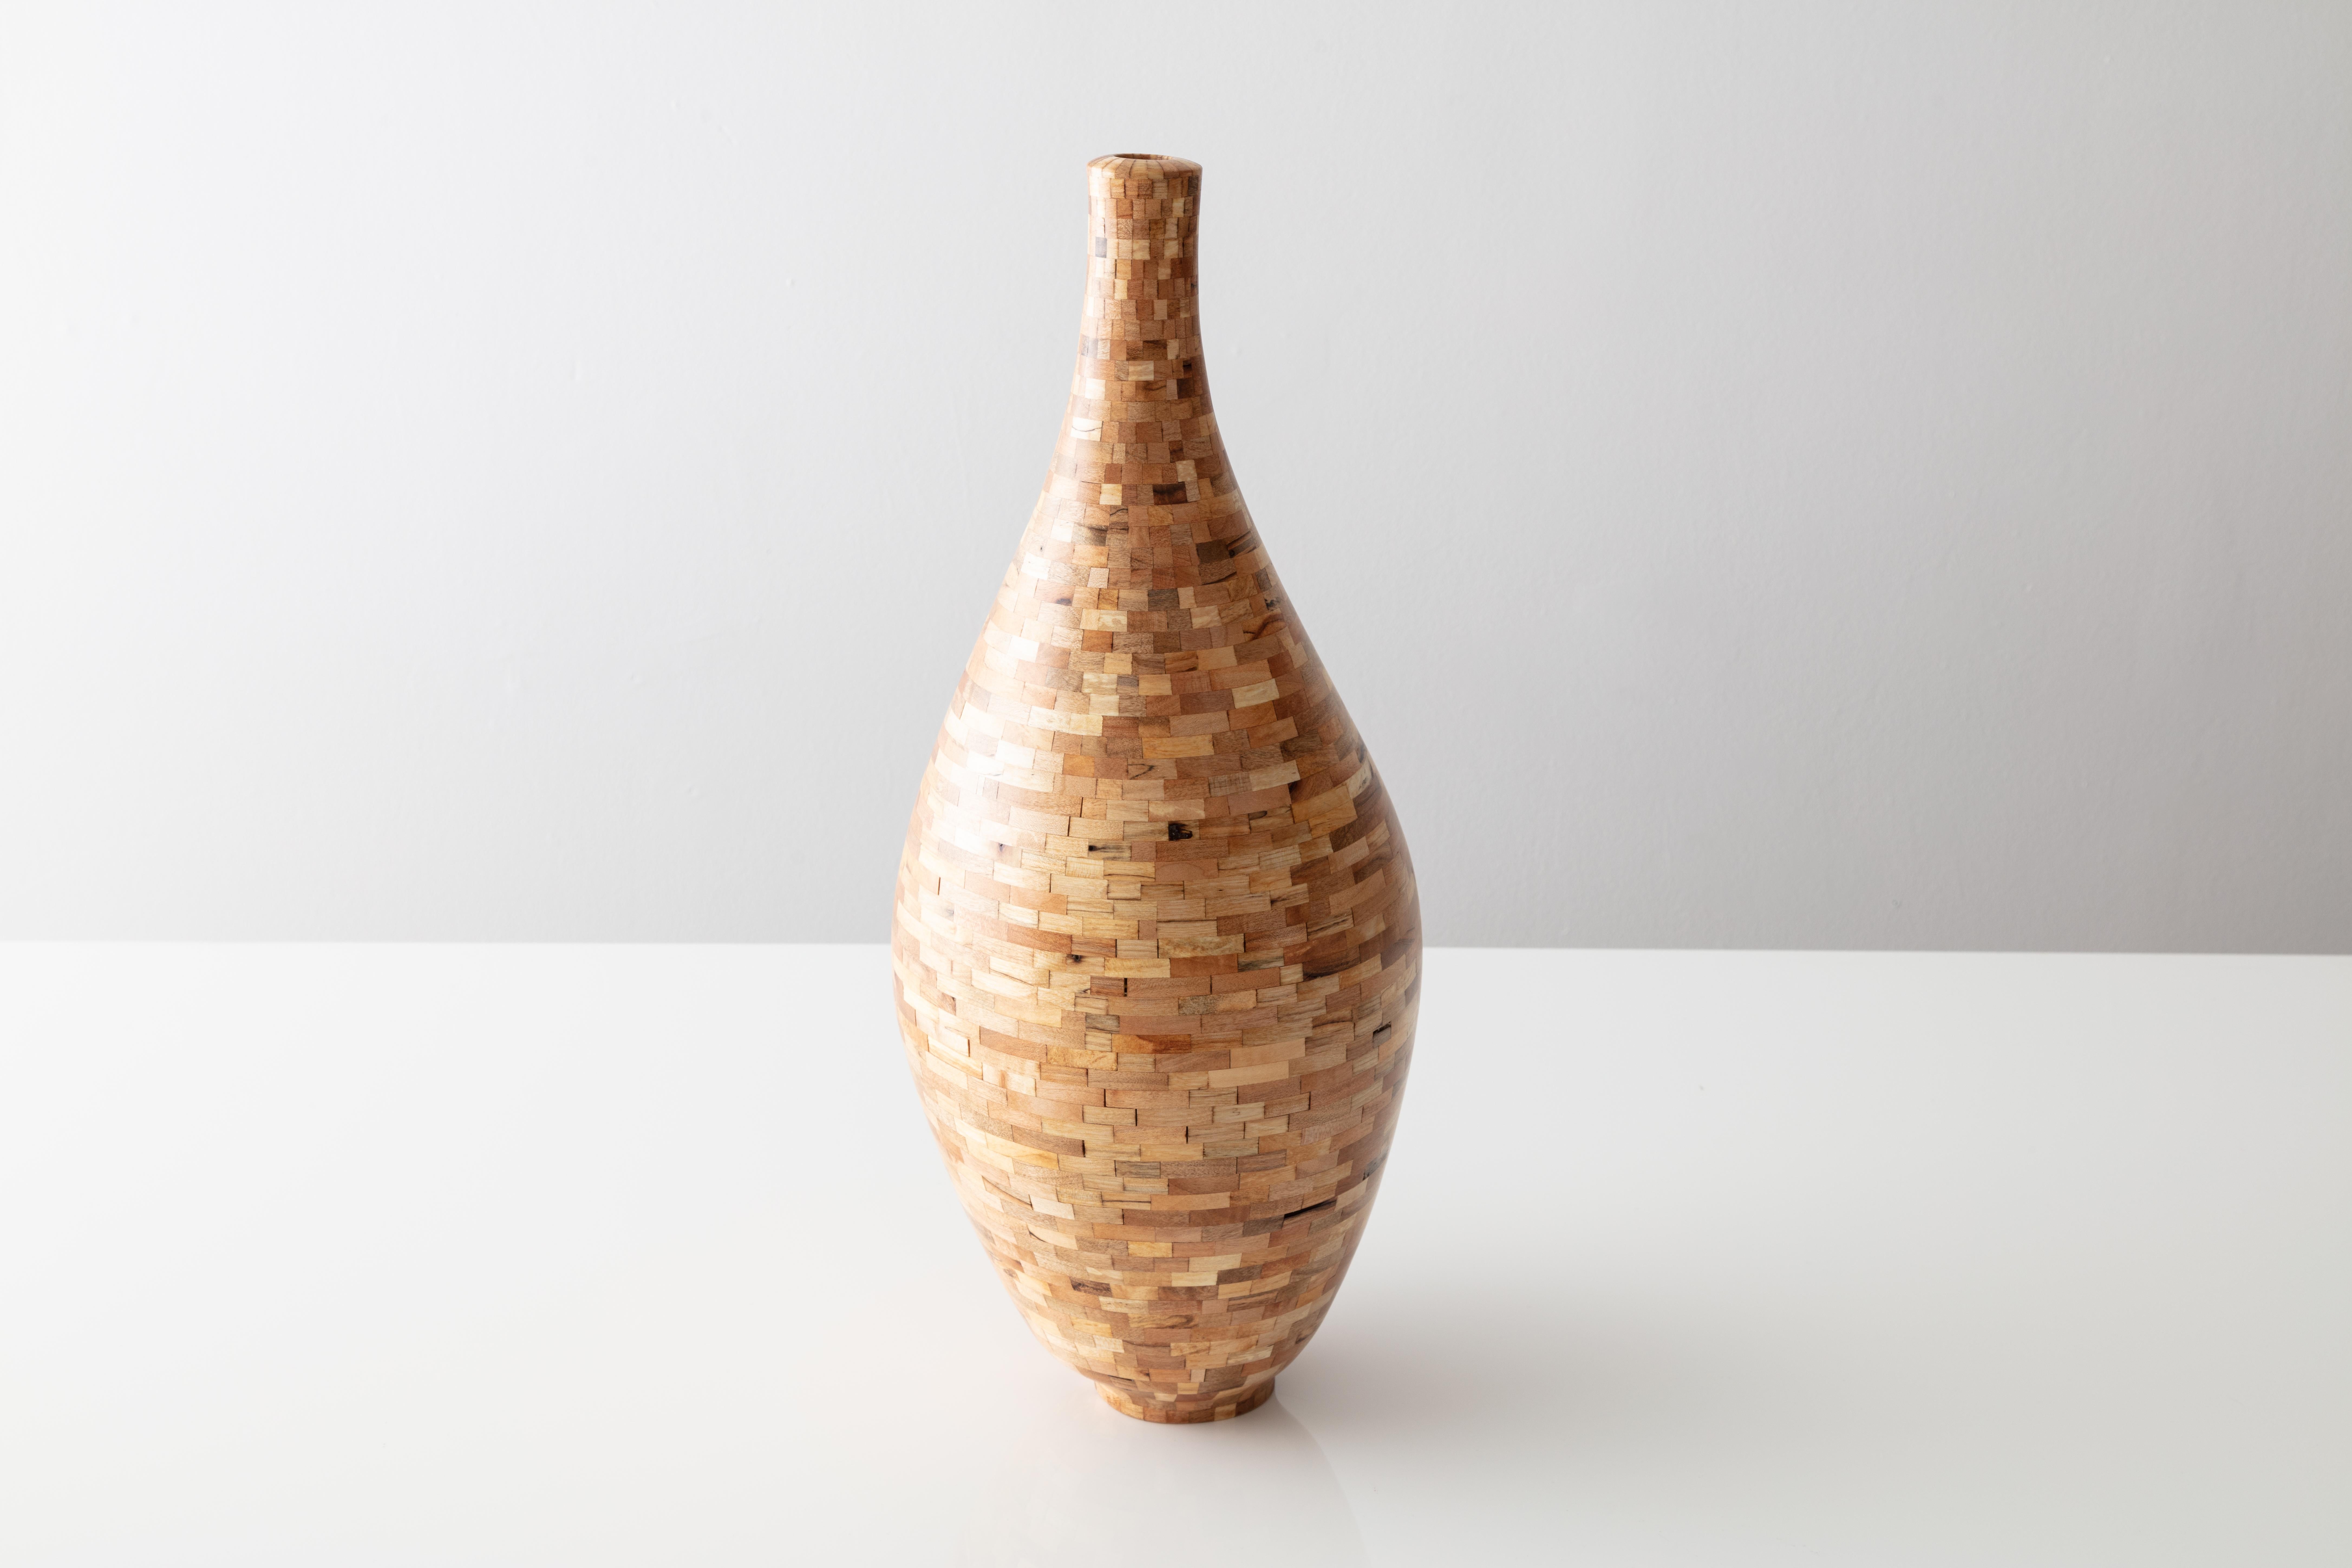 American Contemporary Spalted Maple  Goose Neck Vase #2 by Richard Haining Available Now